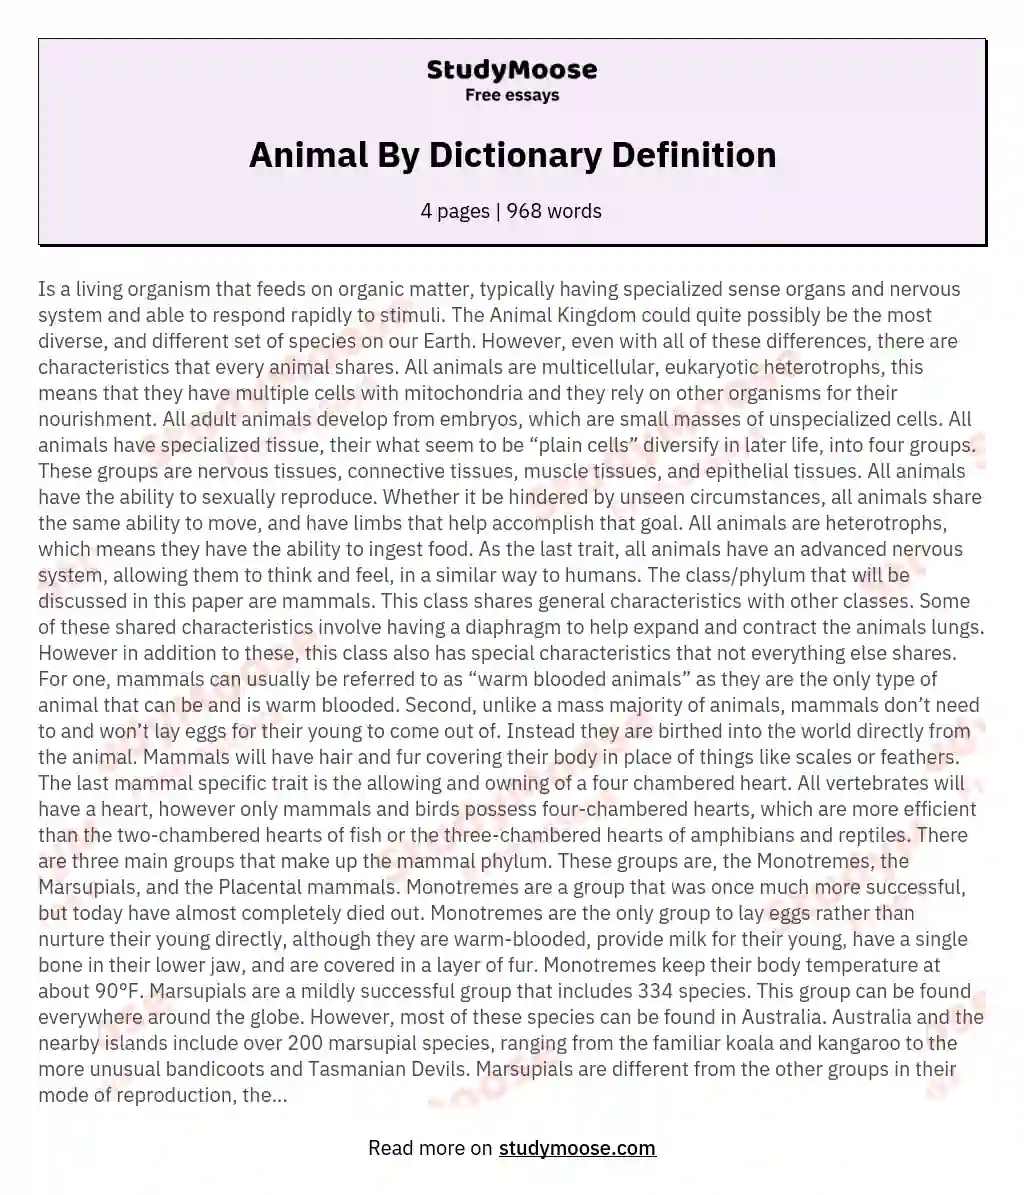 Animal By Dictionary Definition essay